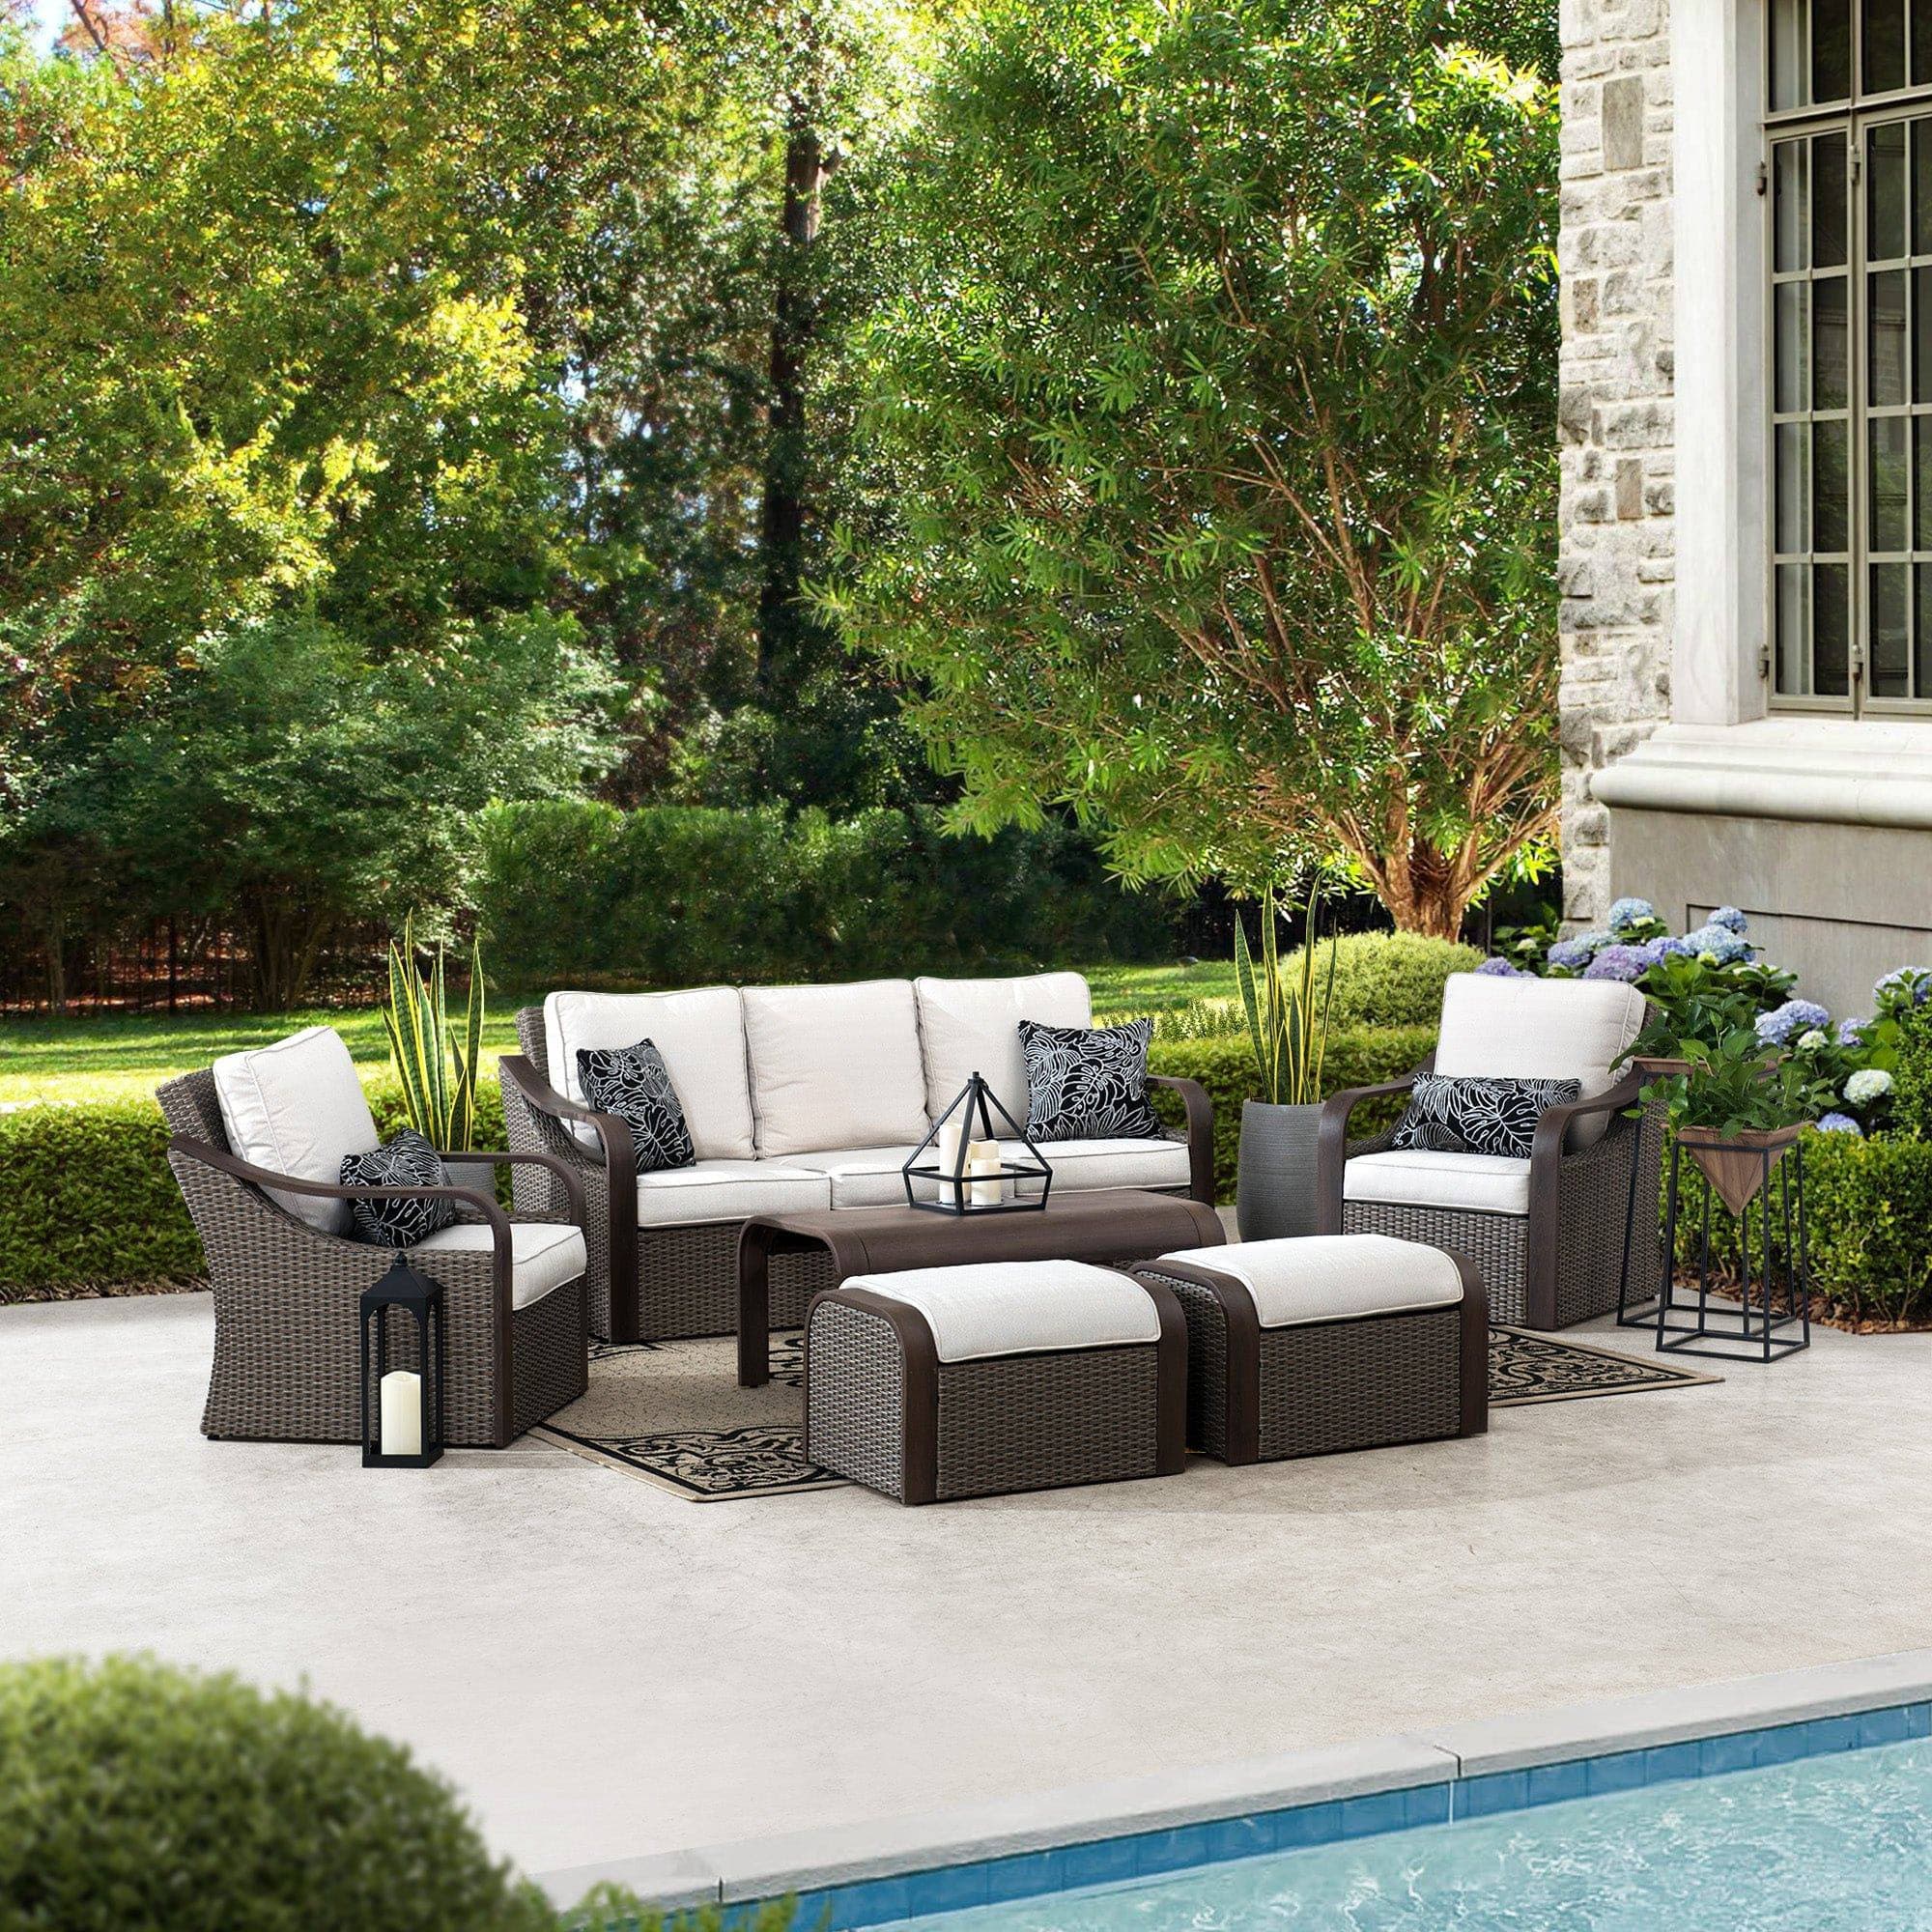 Sunjoy 6-pc. Patio Conversation Sets Brown Wicker Outdoor Furniture Set with Cushions and 2 Ottomans